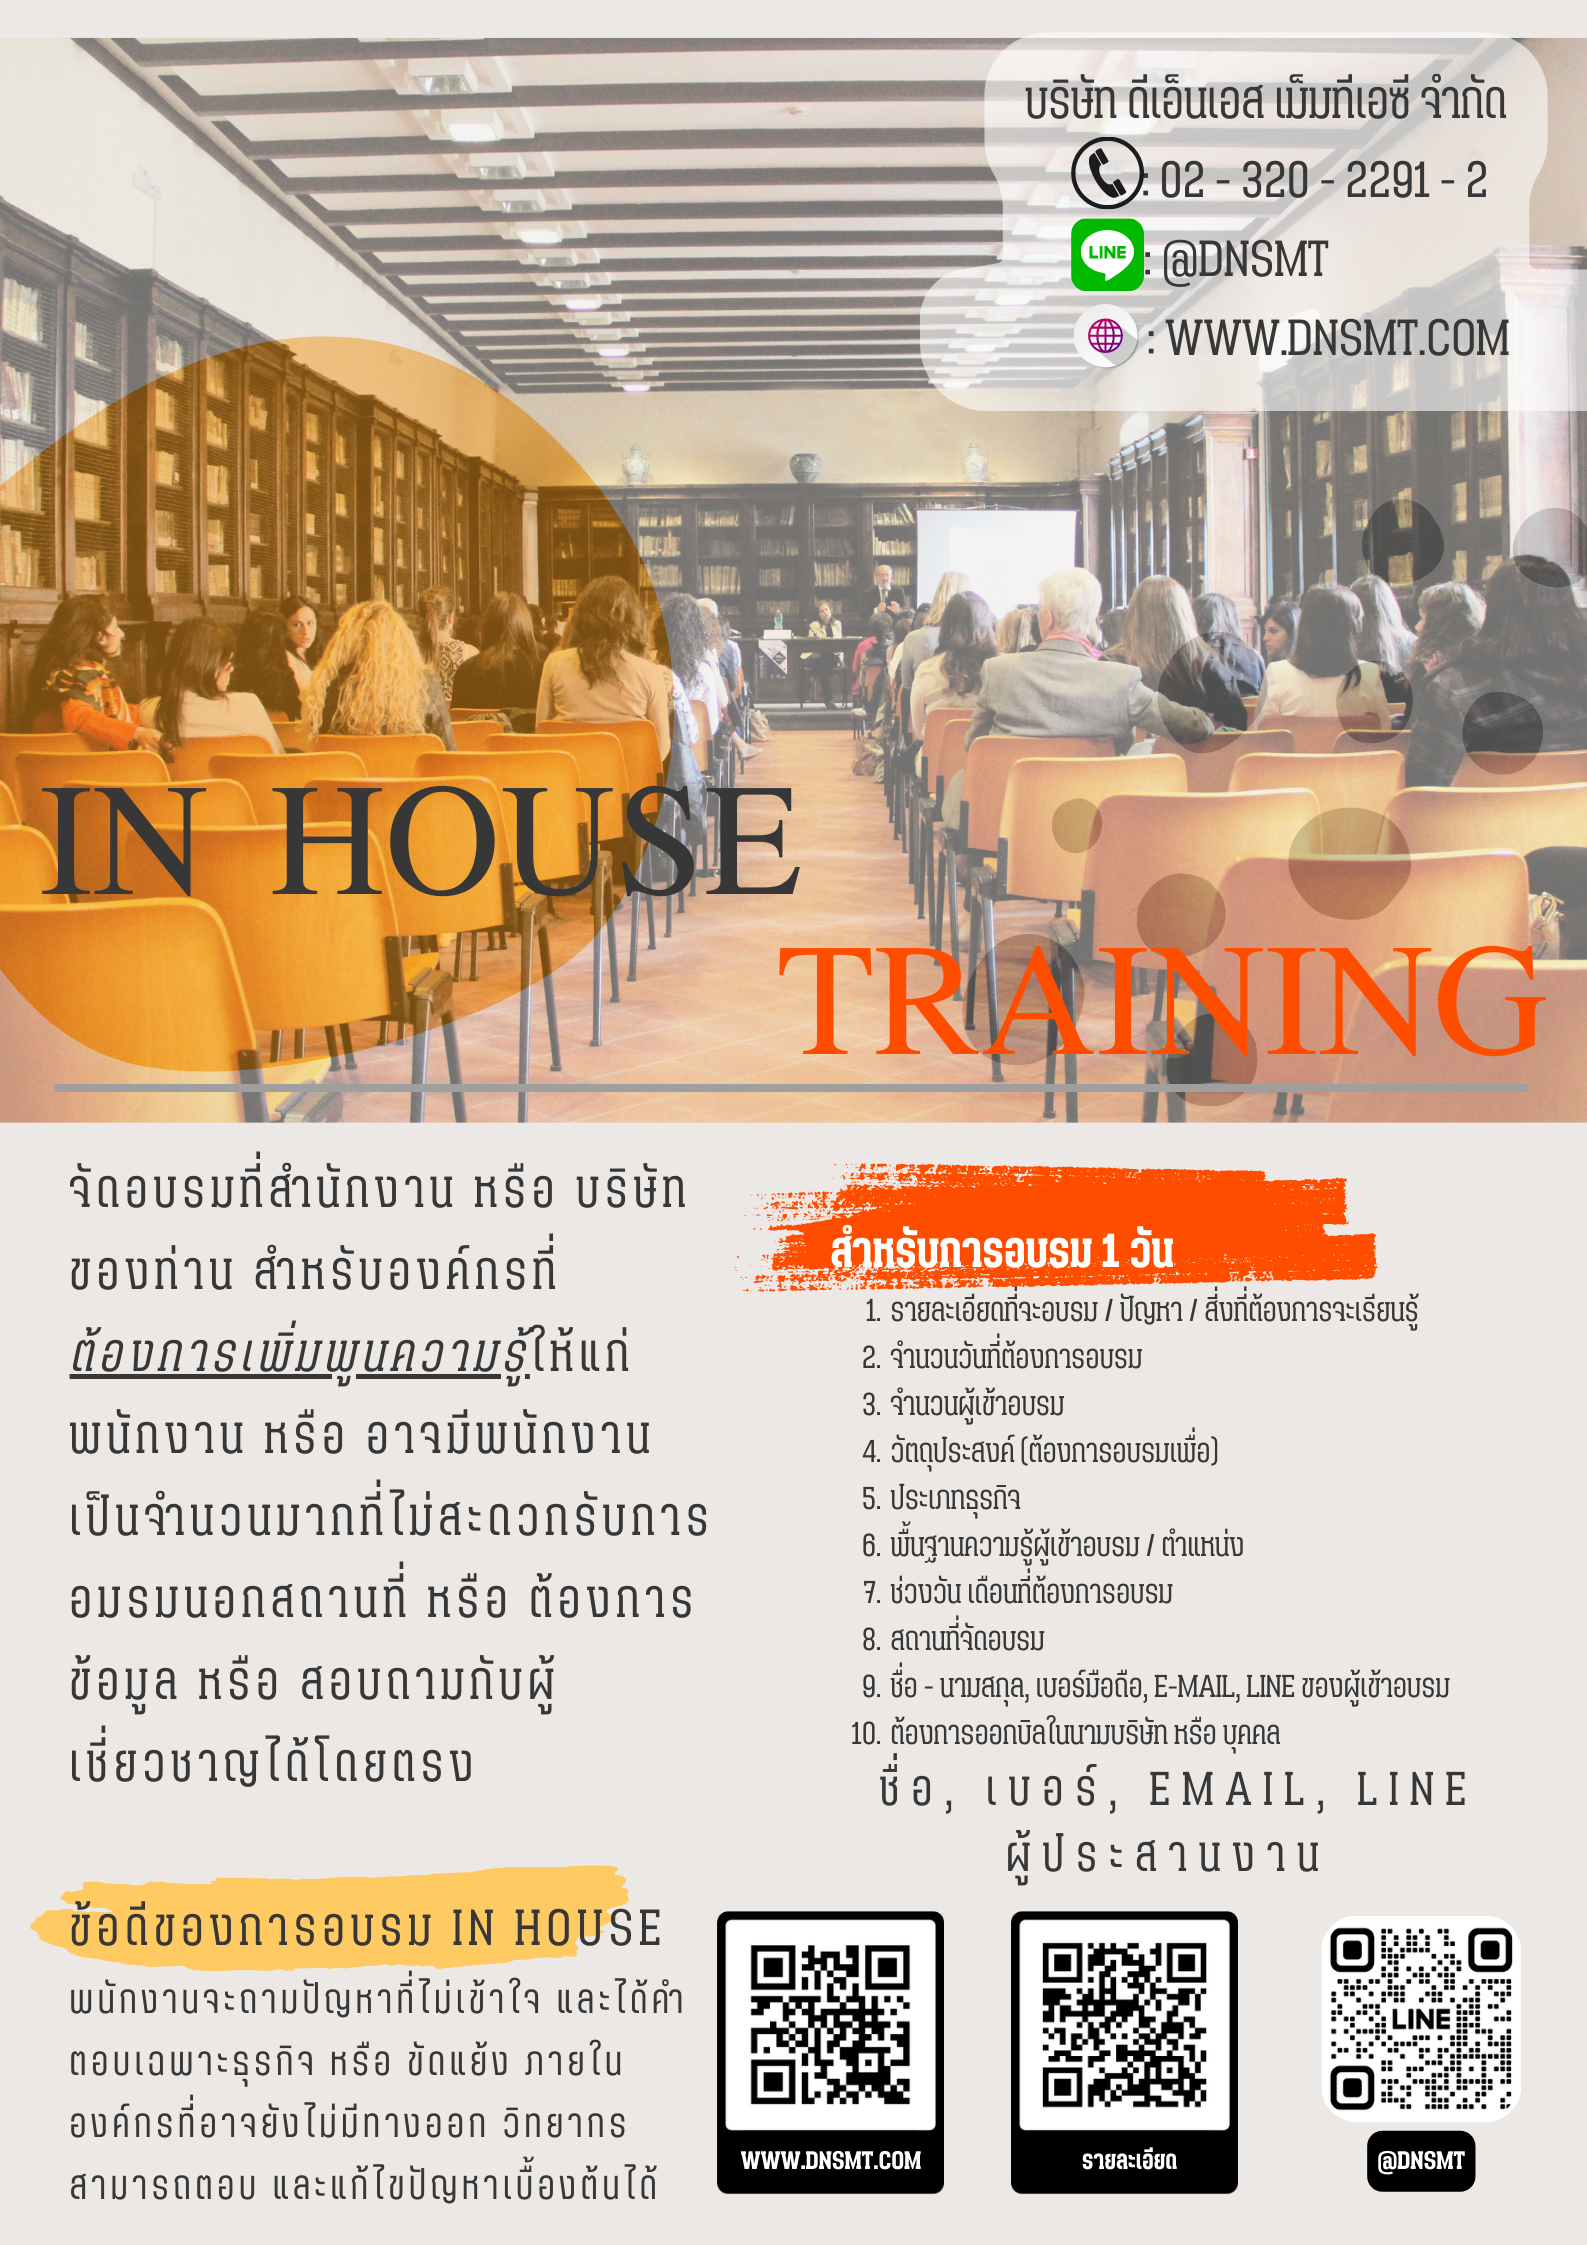 In house training รูปที่ 1